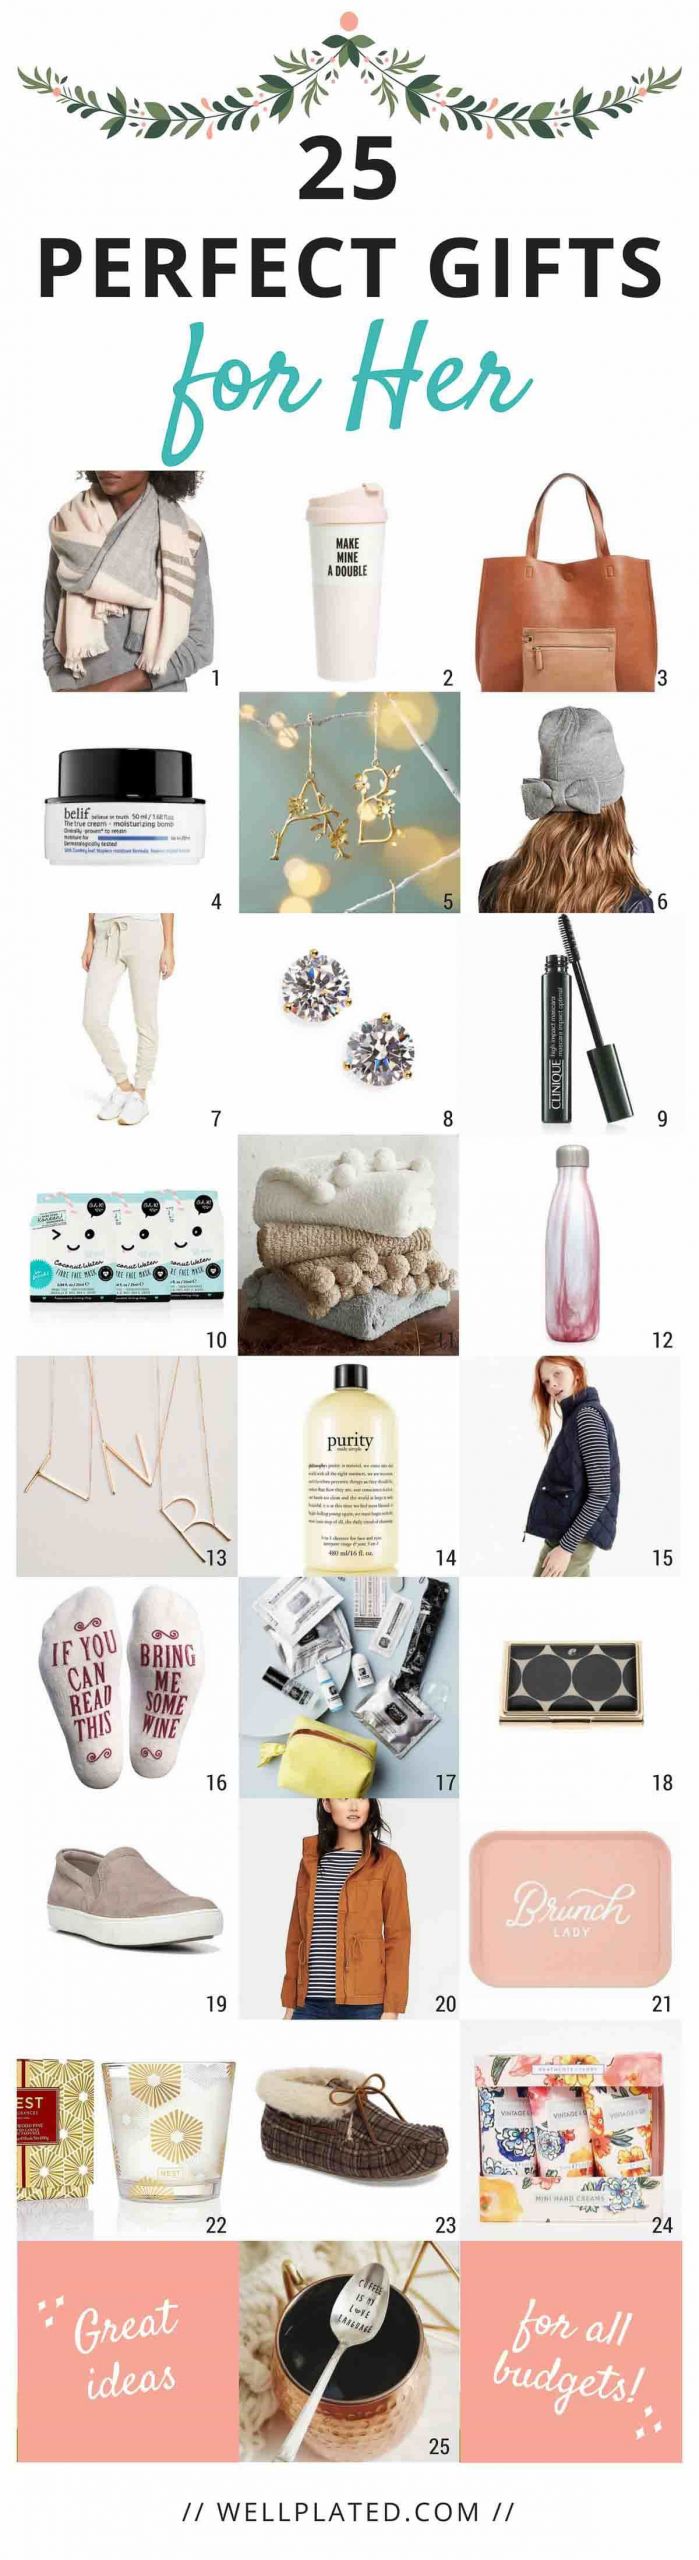 Best Gift Ideas For Her
 25 Perfect Gifts for Her